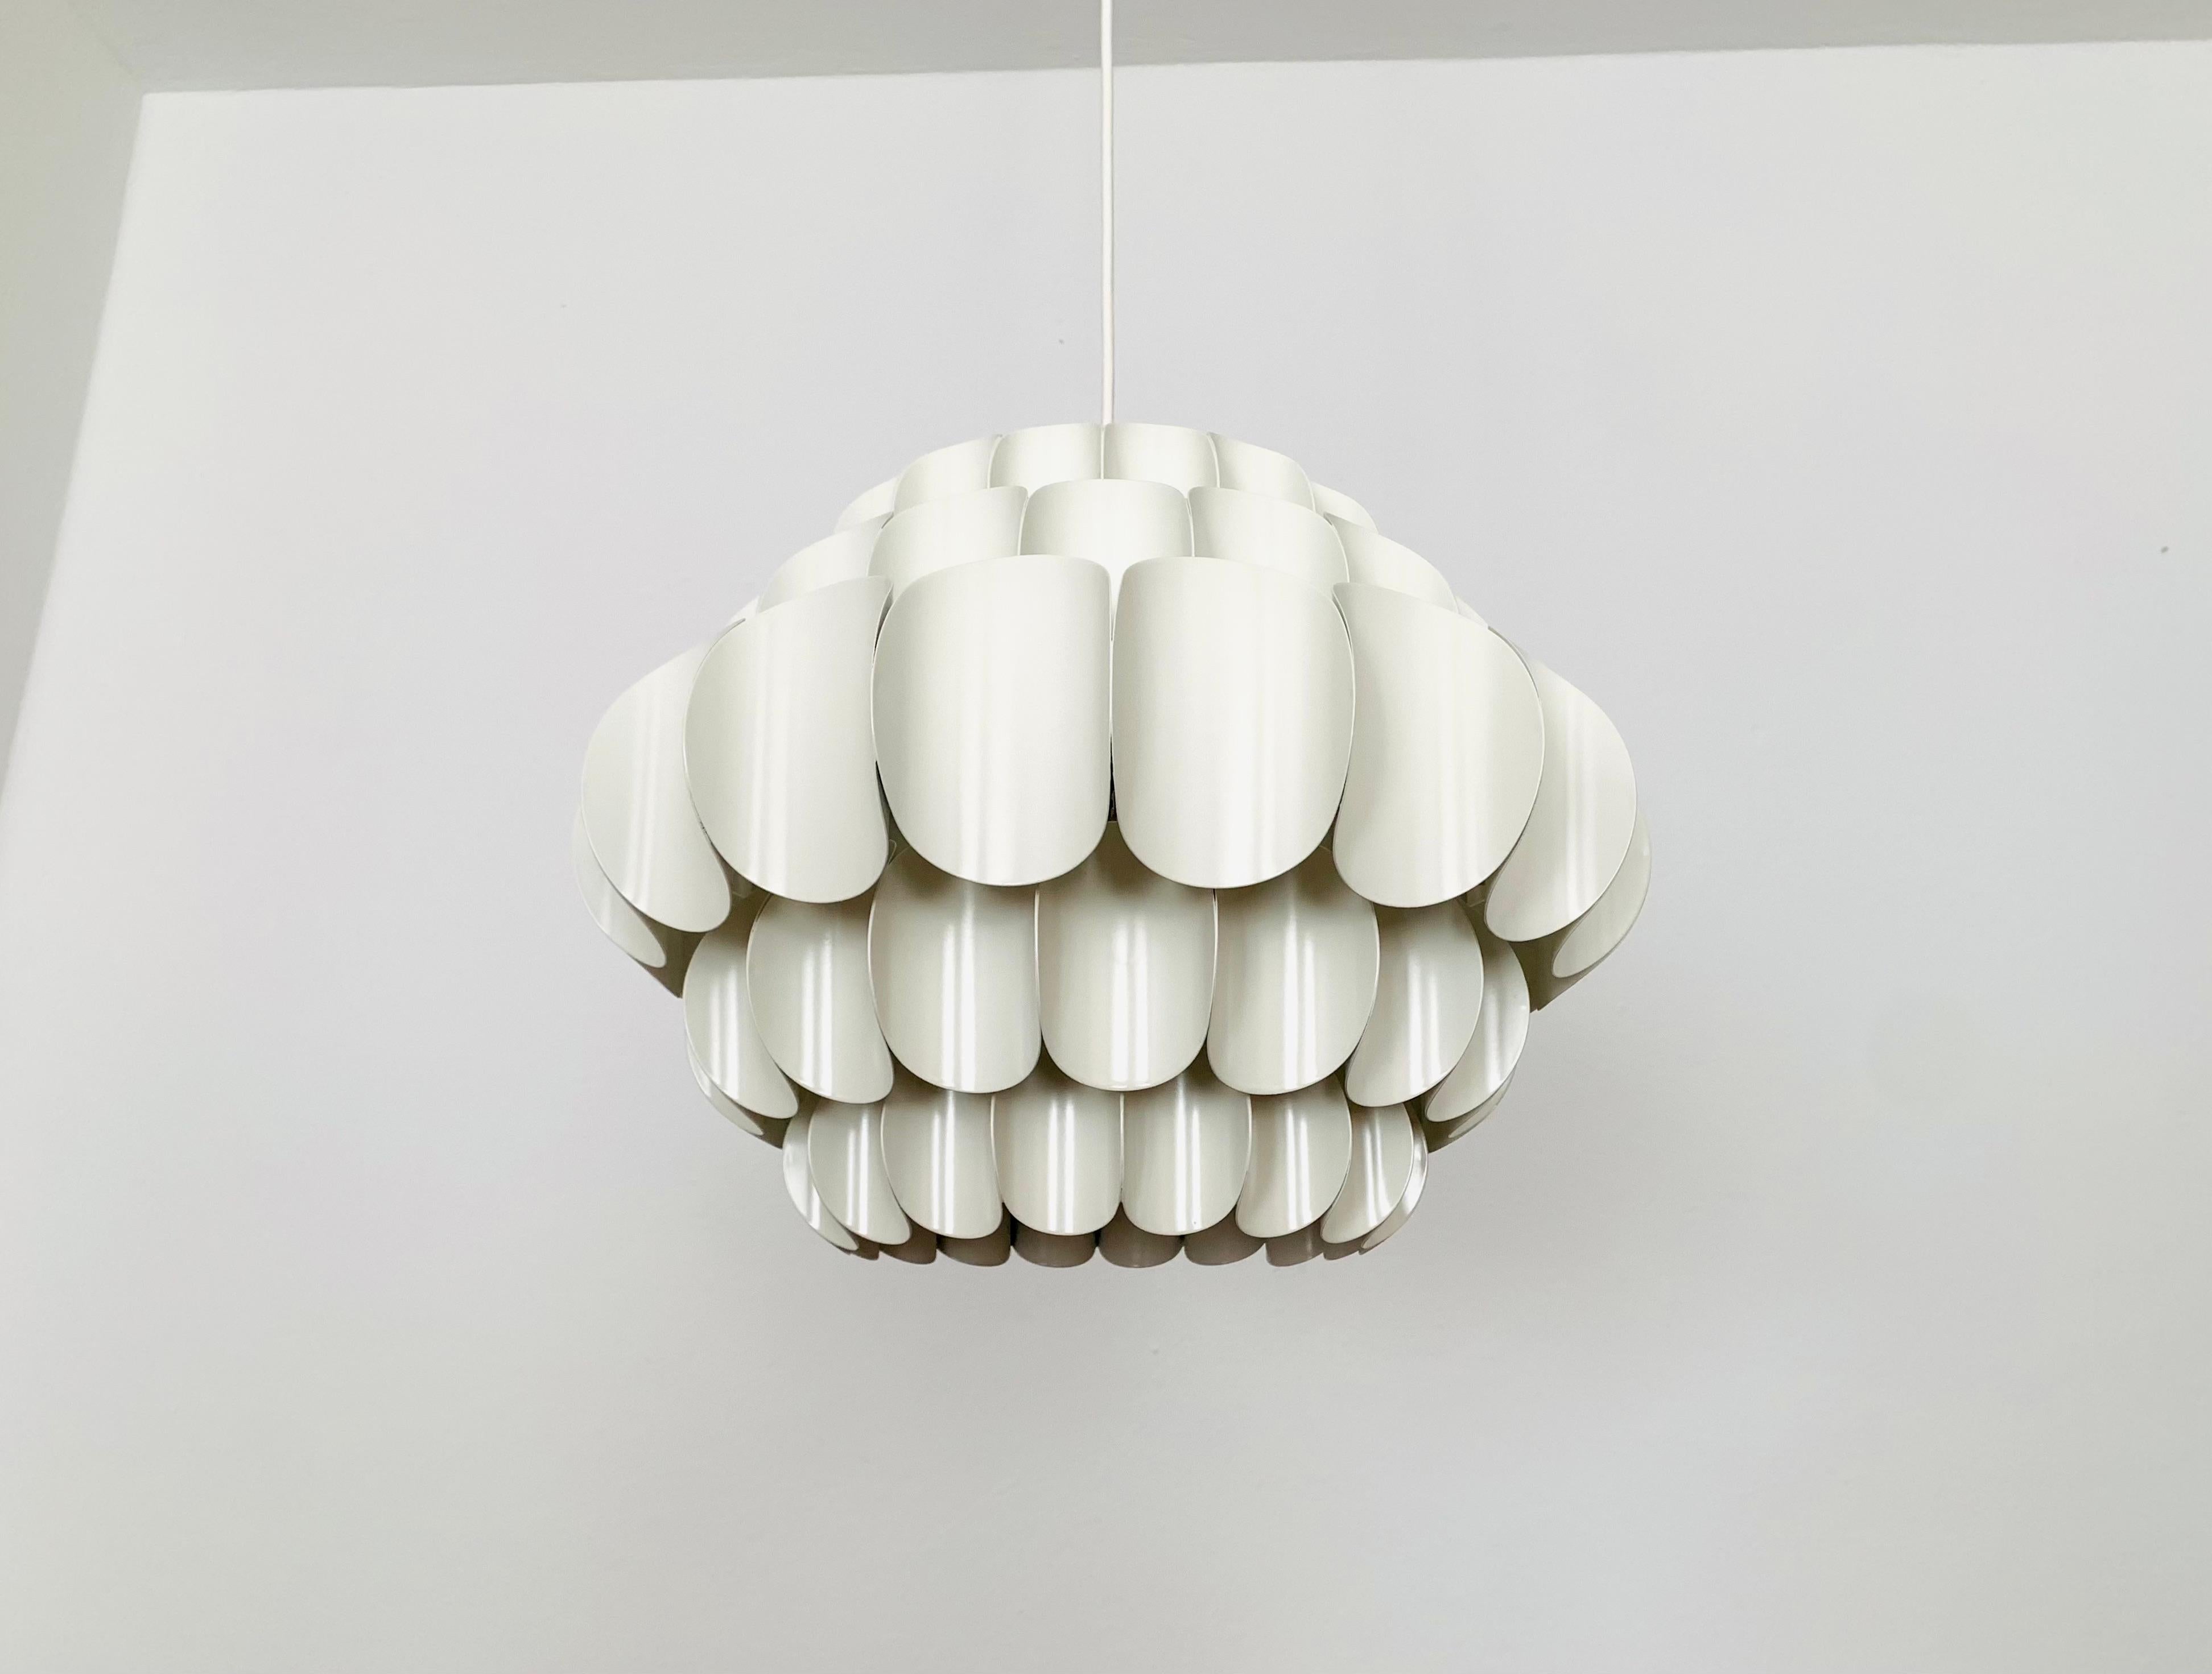 Wonderful white metal pendant lamp by Thorsten Orrling from the 1960s.
The extraordinary design creates a fantastic play of light in the room.
Large version with 5 rows.

Condition:

Very good vintage condition with slight signs of wear consistent